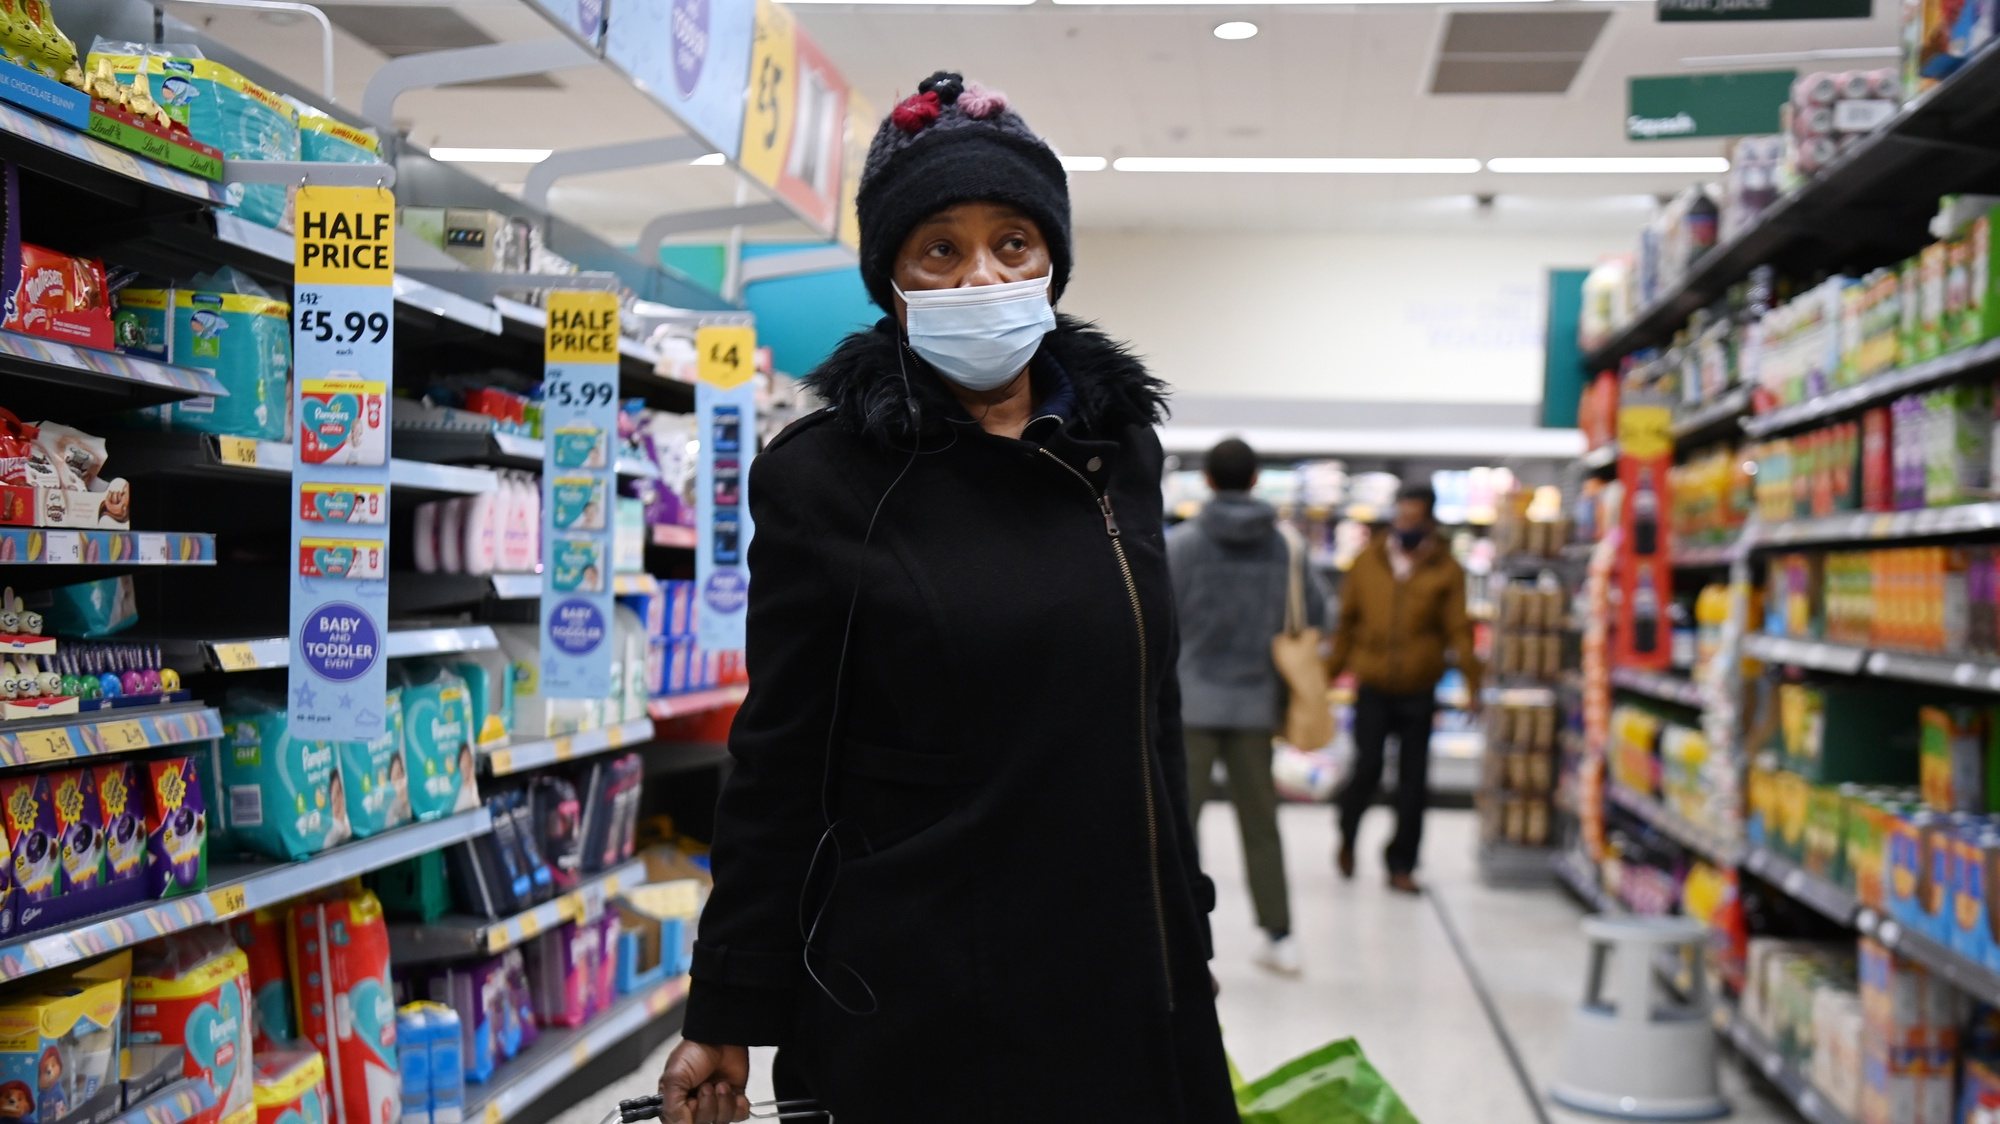 epa08932859 A shopper at a Morrisons supermarket in London, Britain, 12 January 2021. Supermarket chains Morrisons and Sainsbury&#039;s have announced that they will enforce stricter shopping measures by insisting on customers wearing face coverings. Britain&#039;s national health service (NHS) is coming under severe pressure as Covid-19 hospital admissions continue to rise across the UK.  EPA/ANDY RAIN